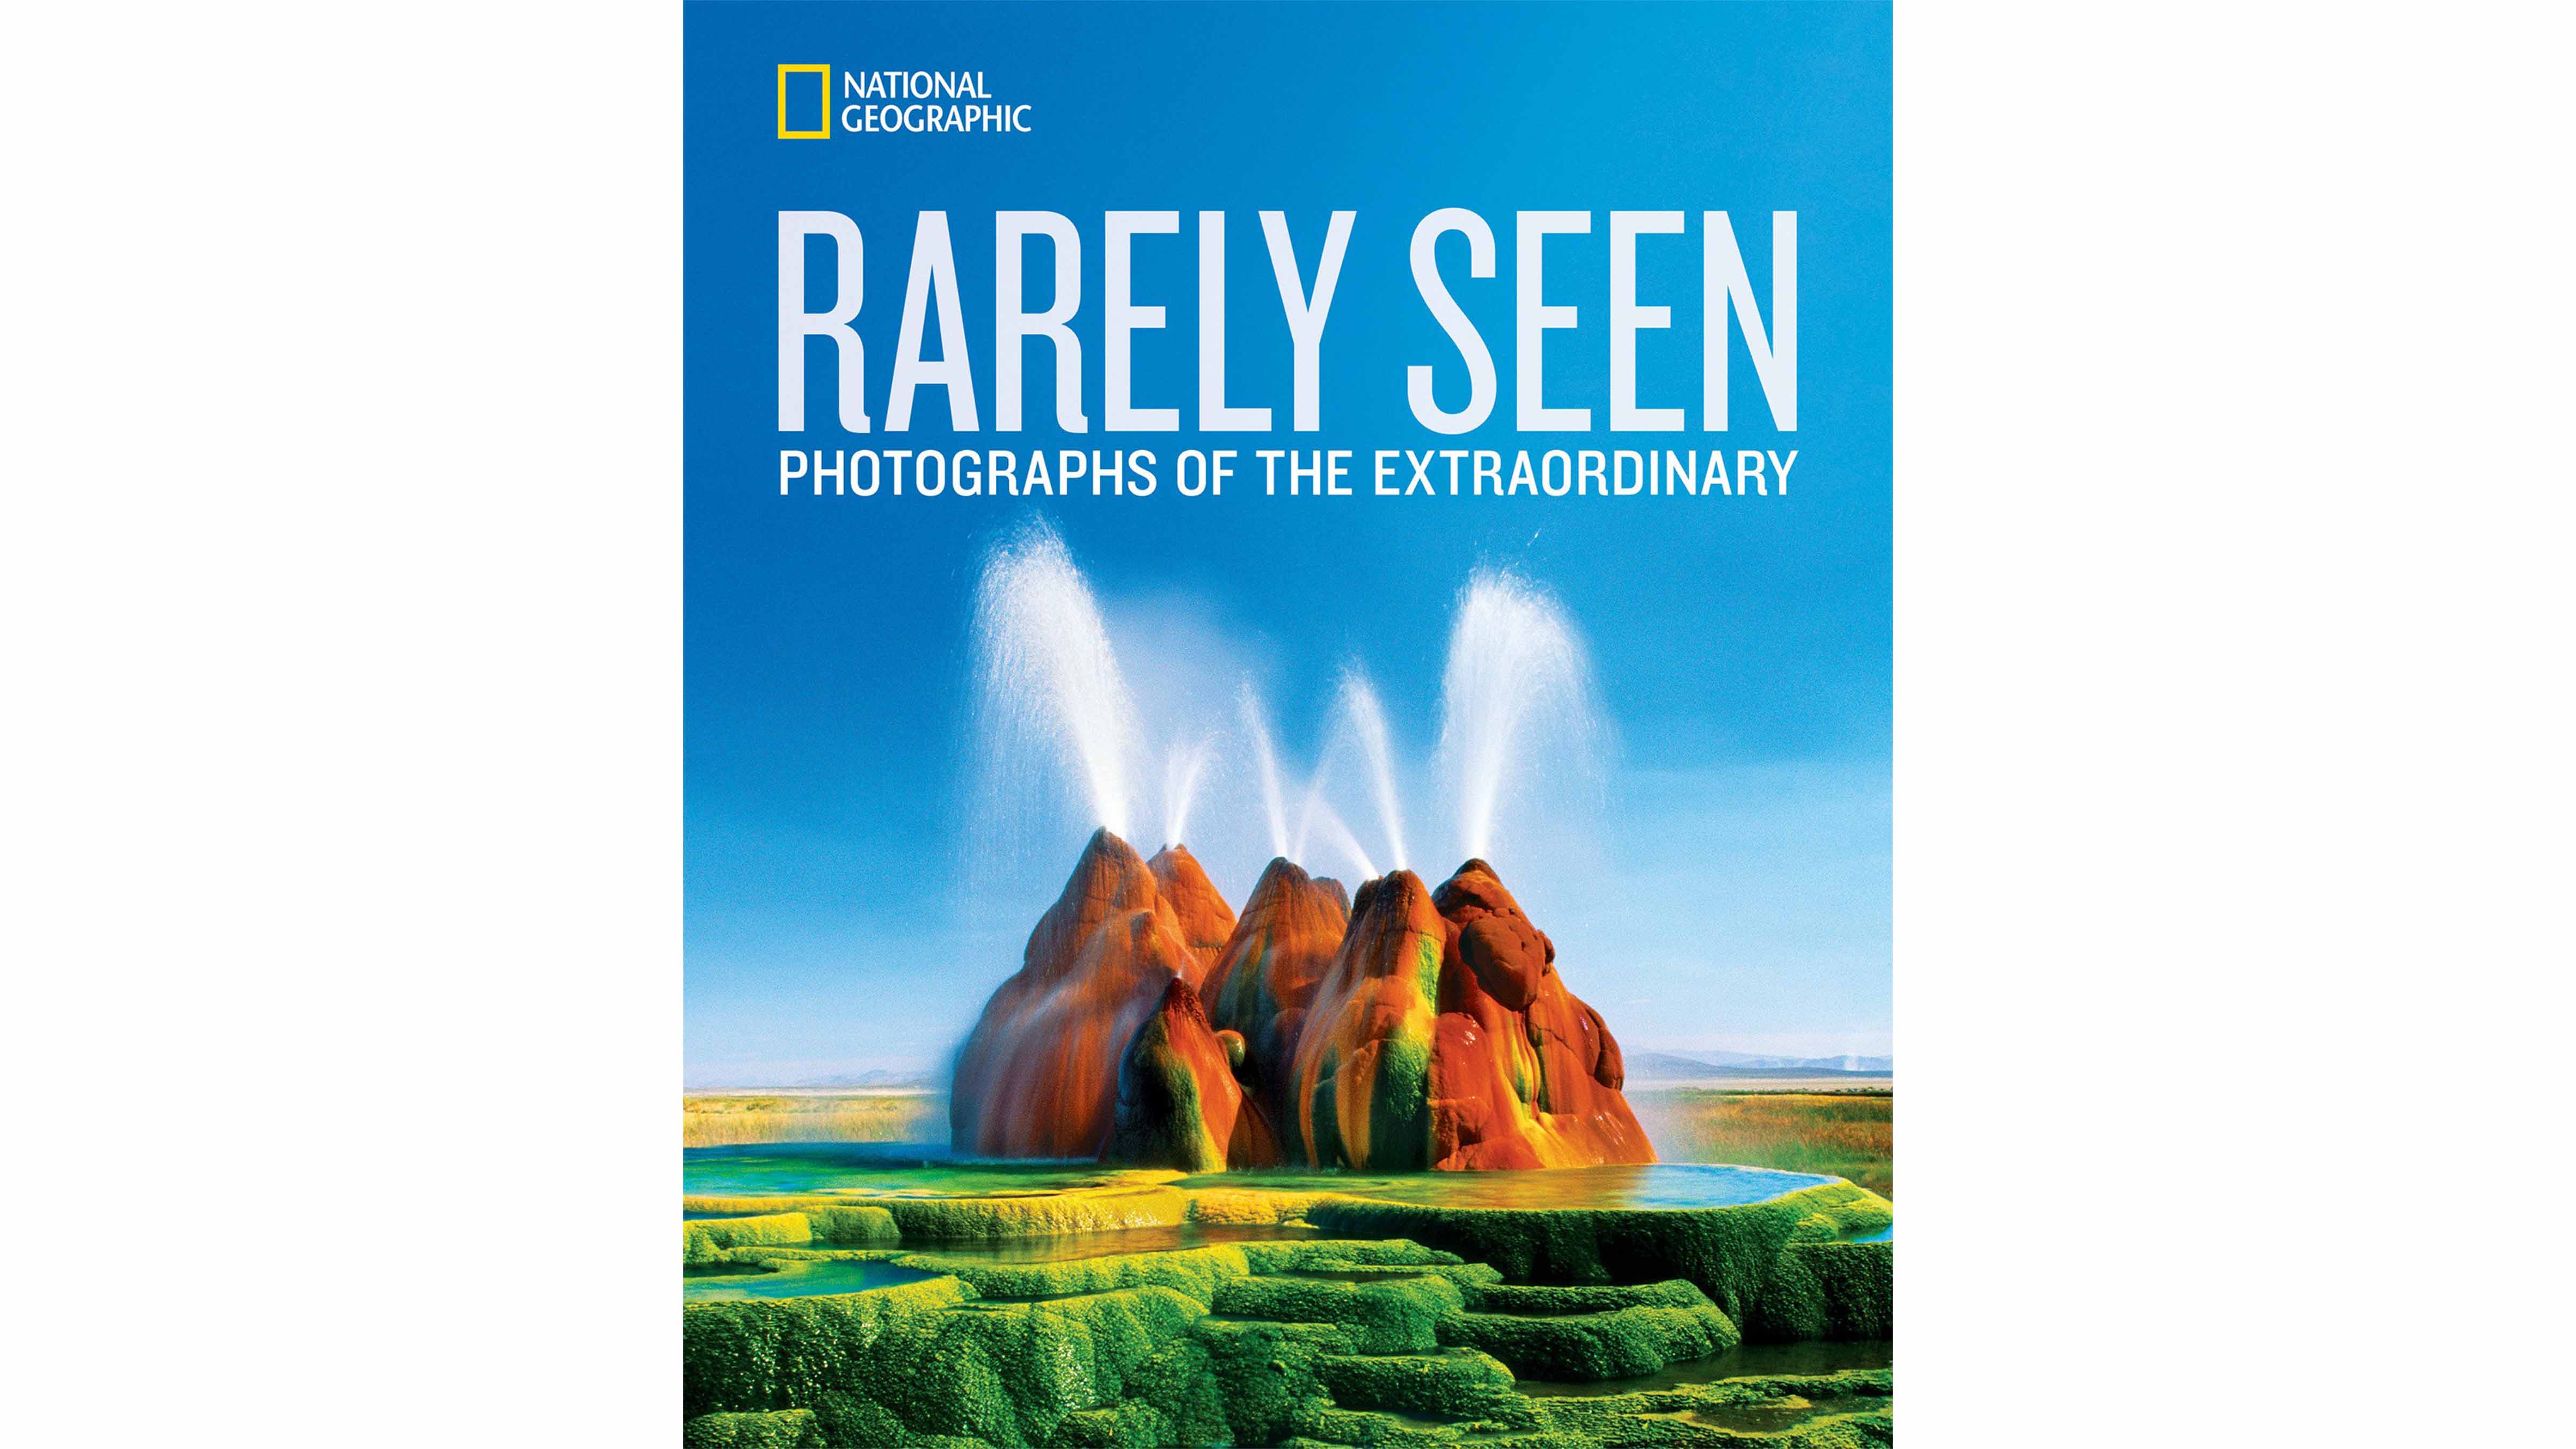 Cover of National Geographic Rarely Seen, one of the best books on photography